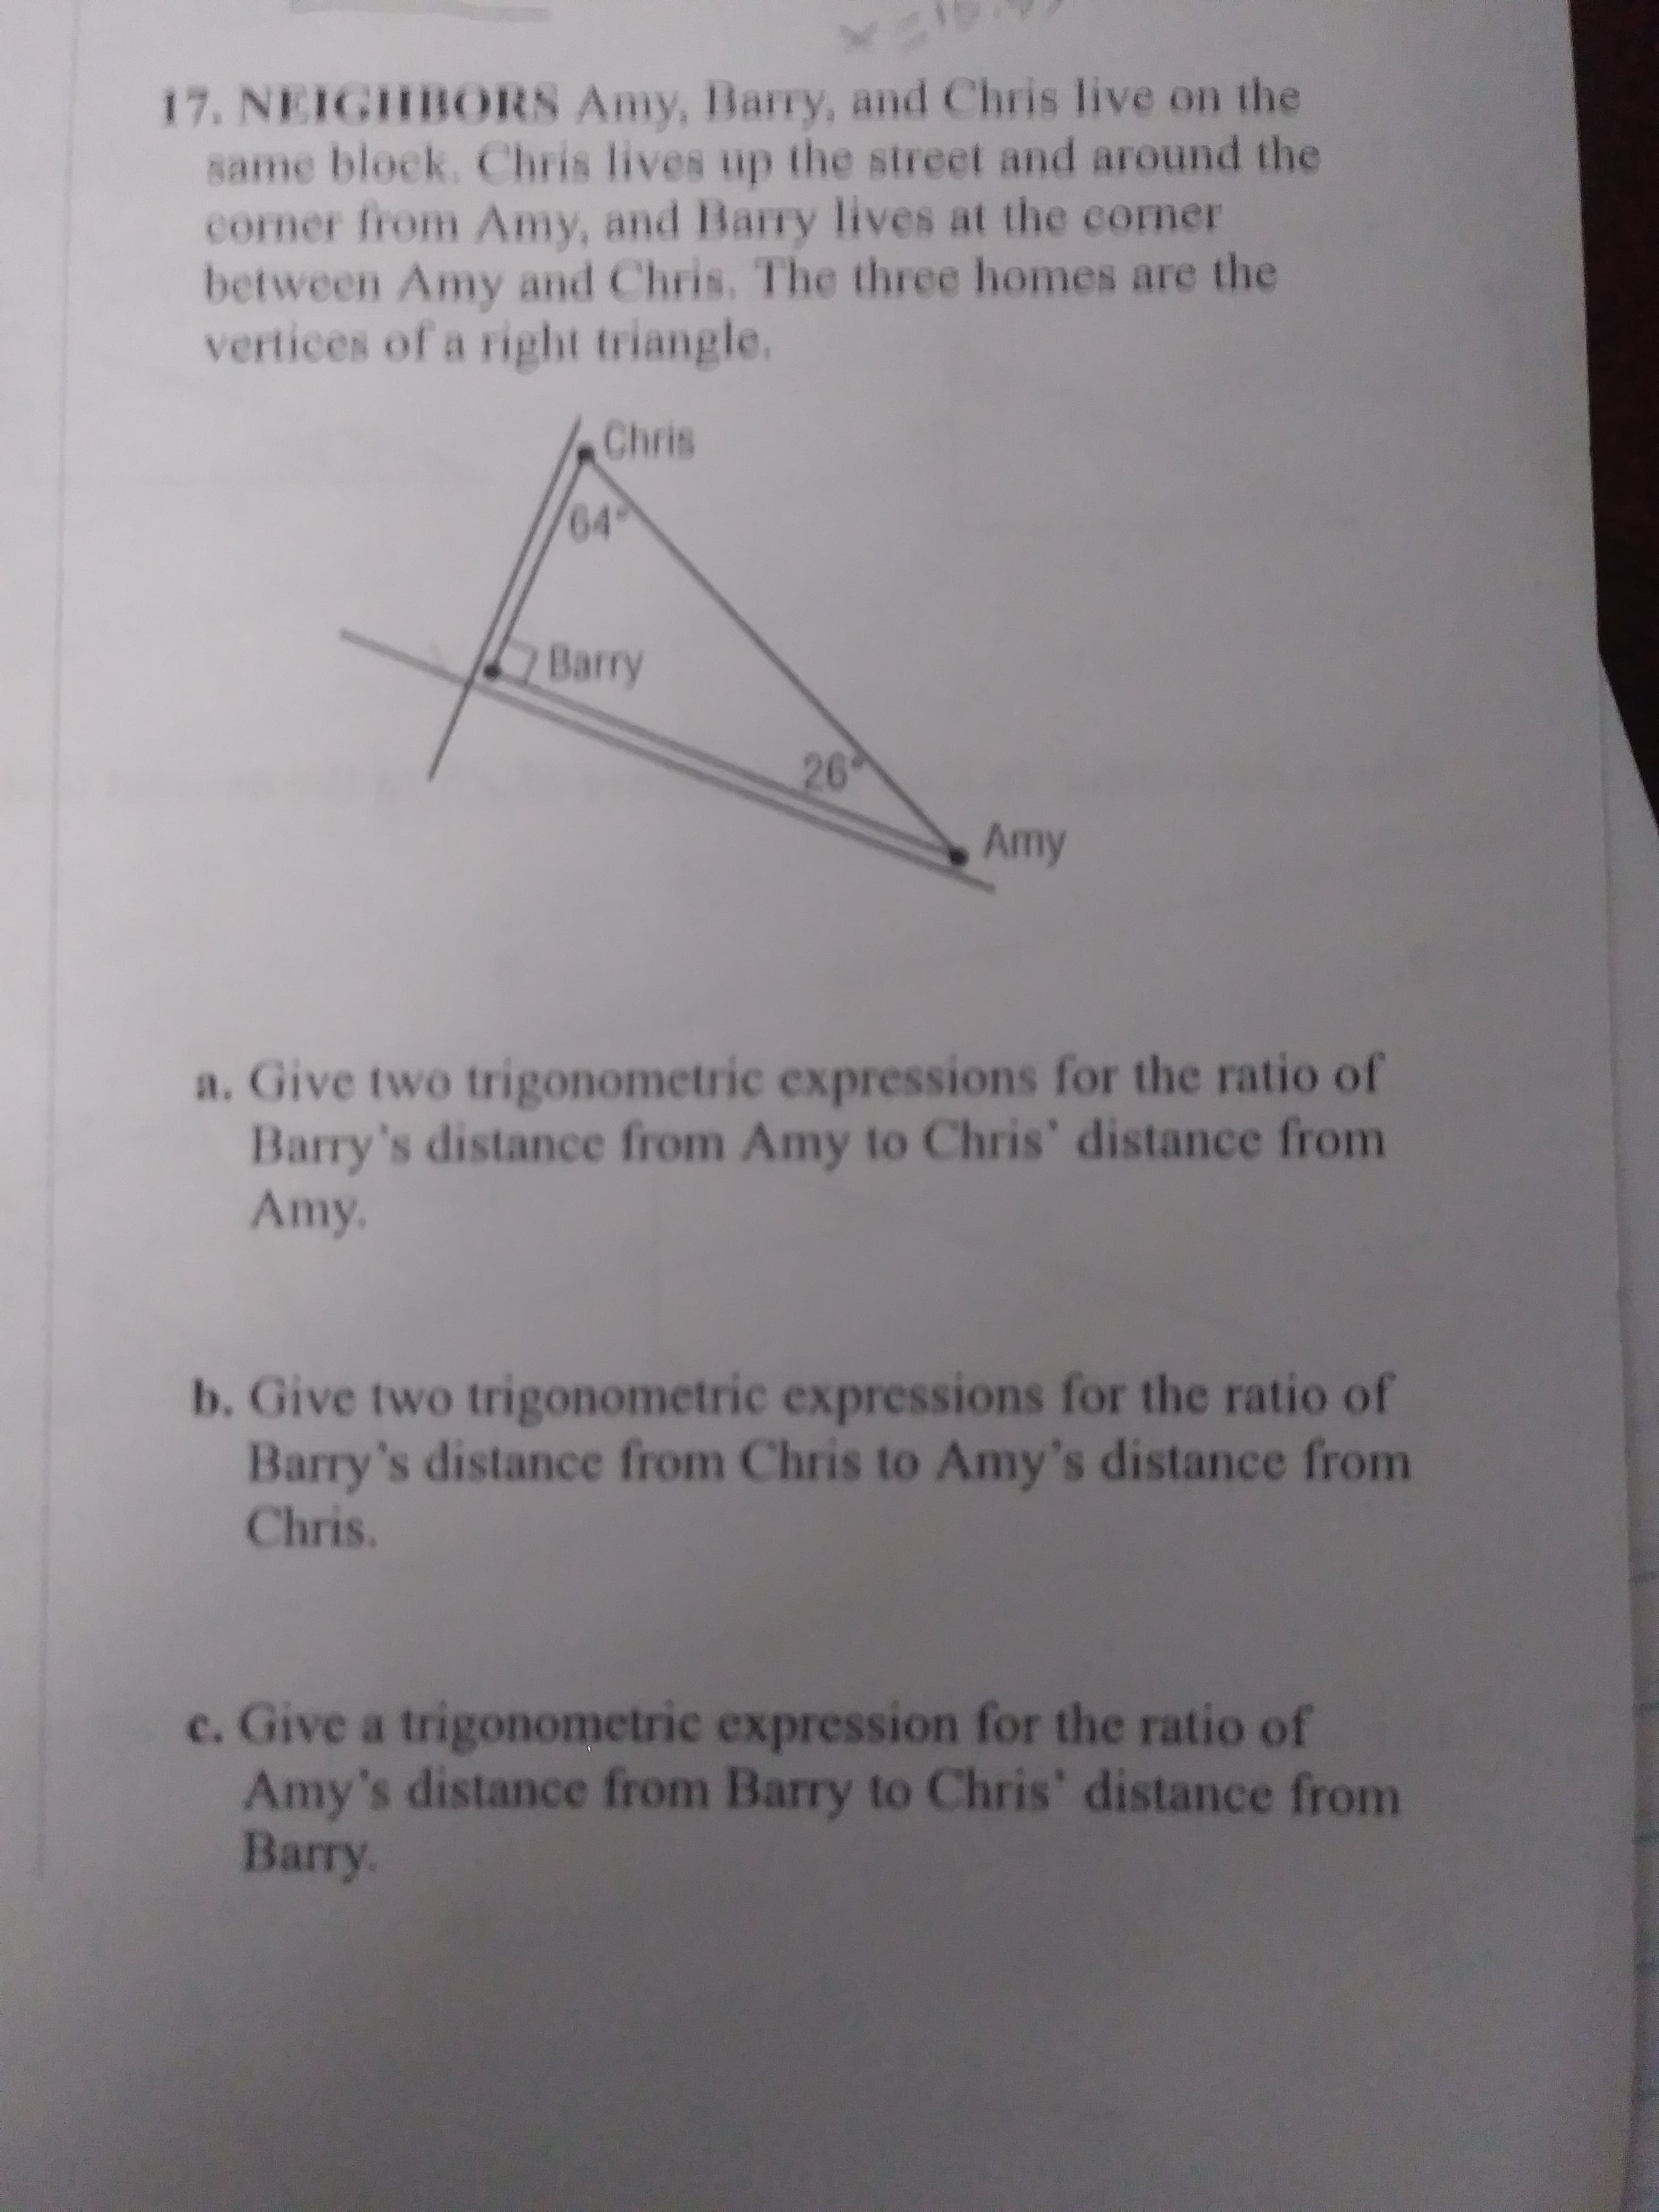 a. Give two trigonometric expressions for the ratio of
Barry's distance from Amy to Chris' distance from
Amy.
b. Give two trigonometric expressions for the ratio of
Barry's distance from Chris to Amy's distance from
Chris.
c. Give a trigonometric expression for the ratio of
Amy's distance from Barry to Chris' distance from
Barry.
